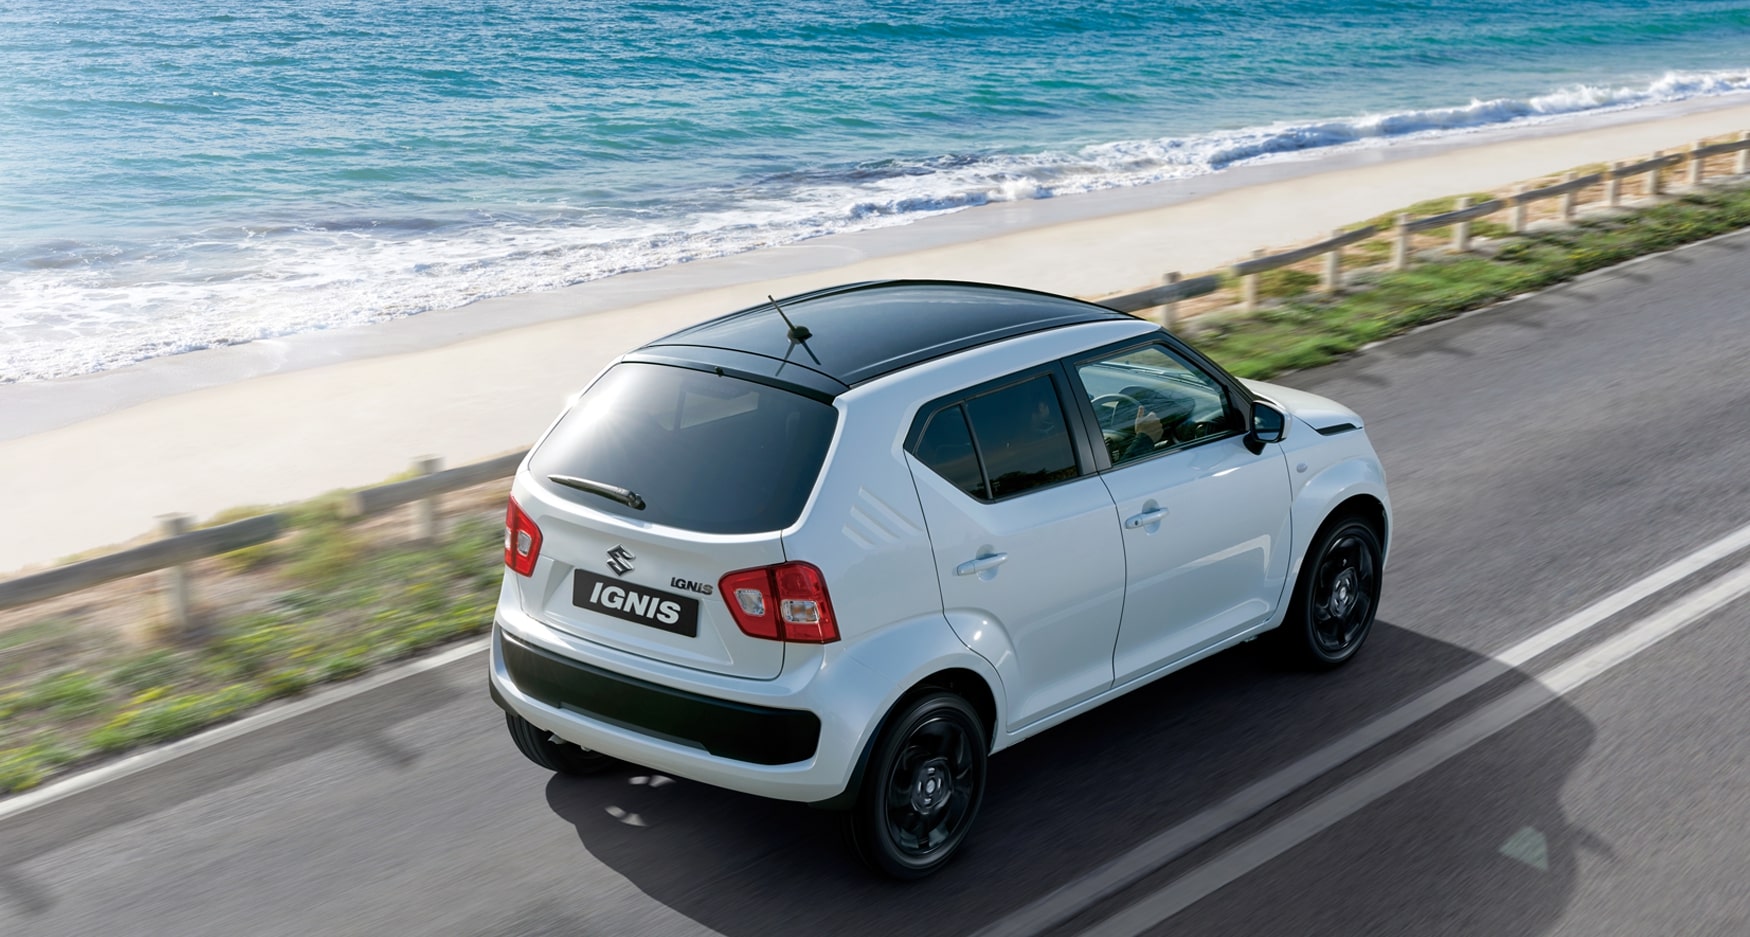 January Marks Record Sales for Suzuki in New Zealand